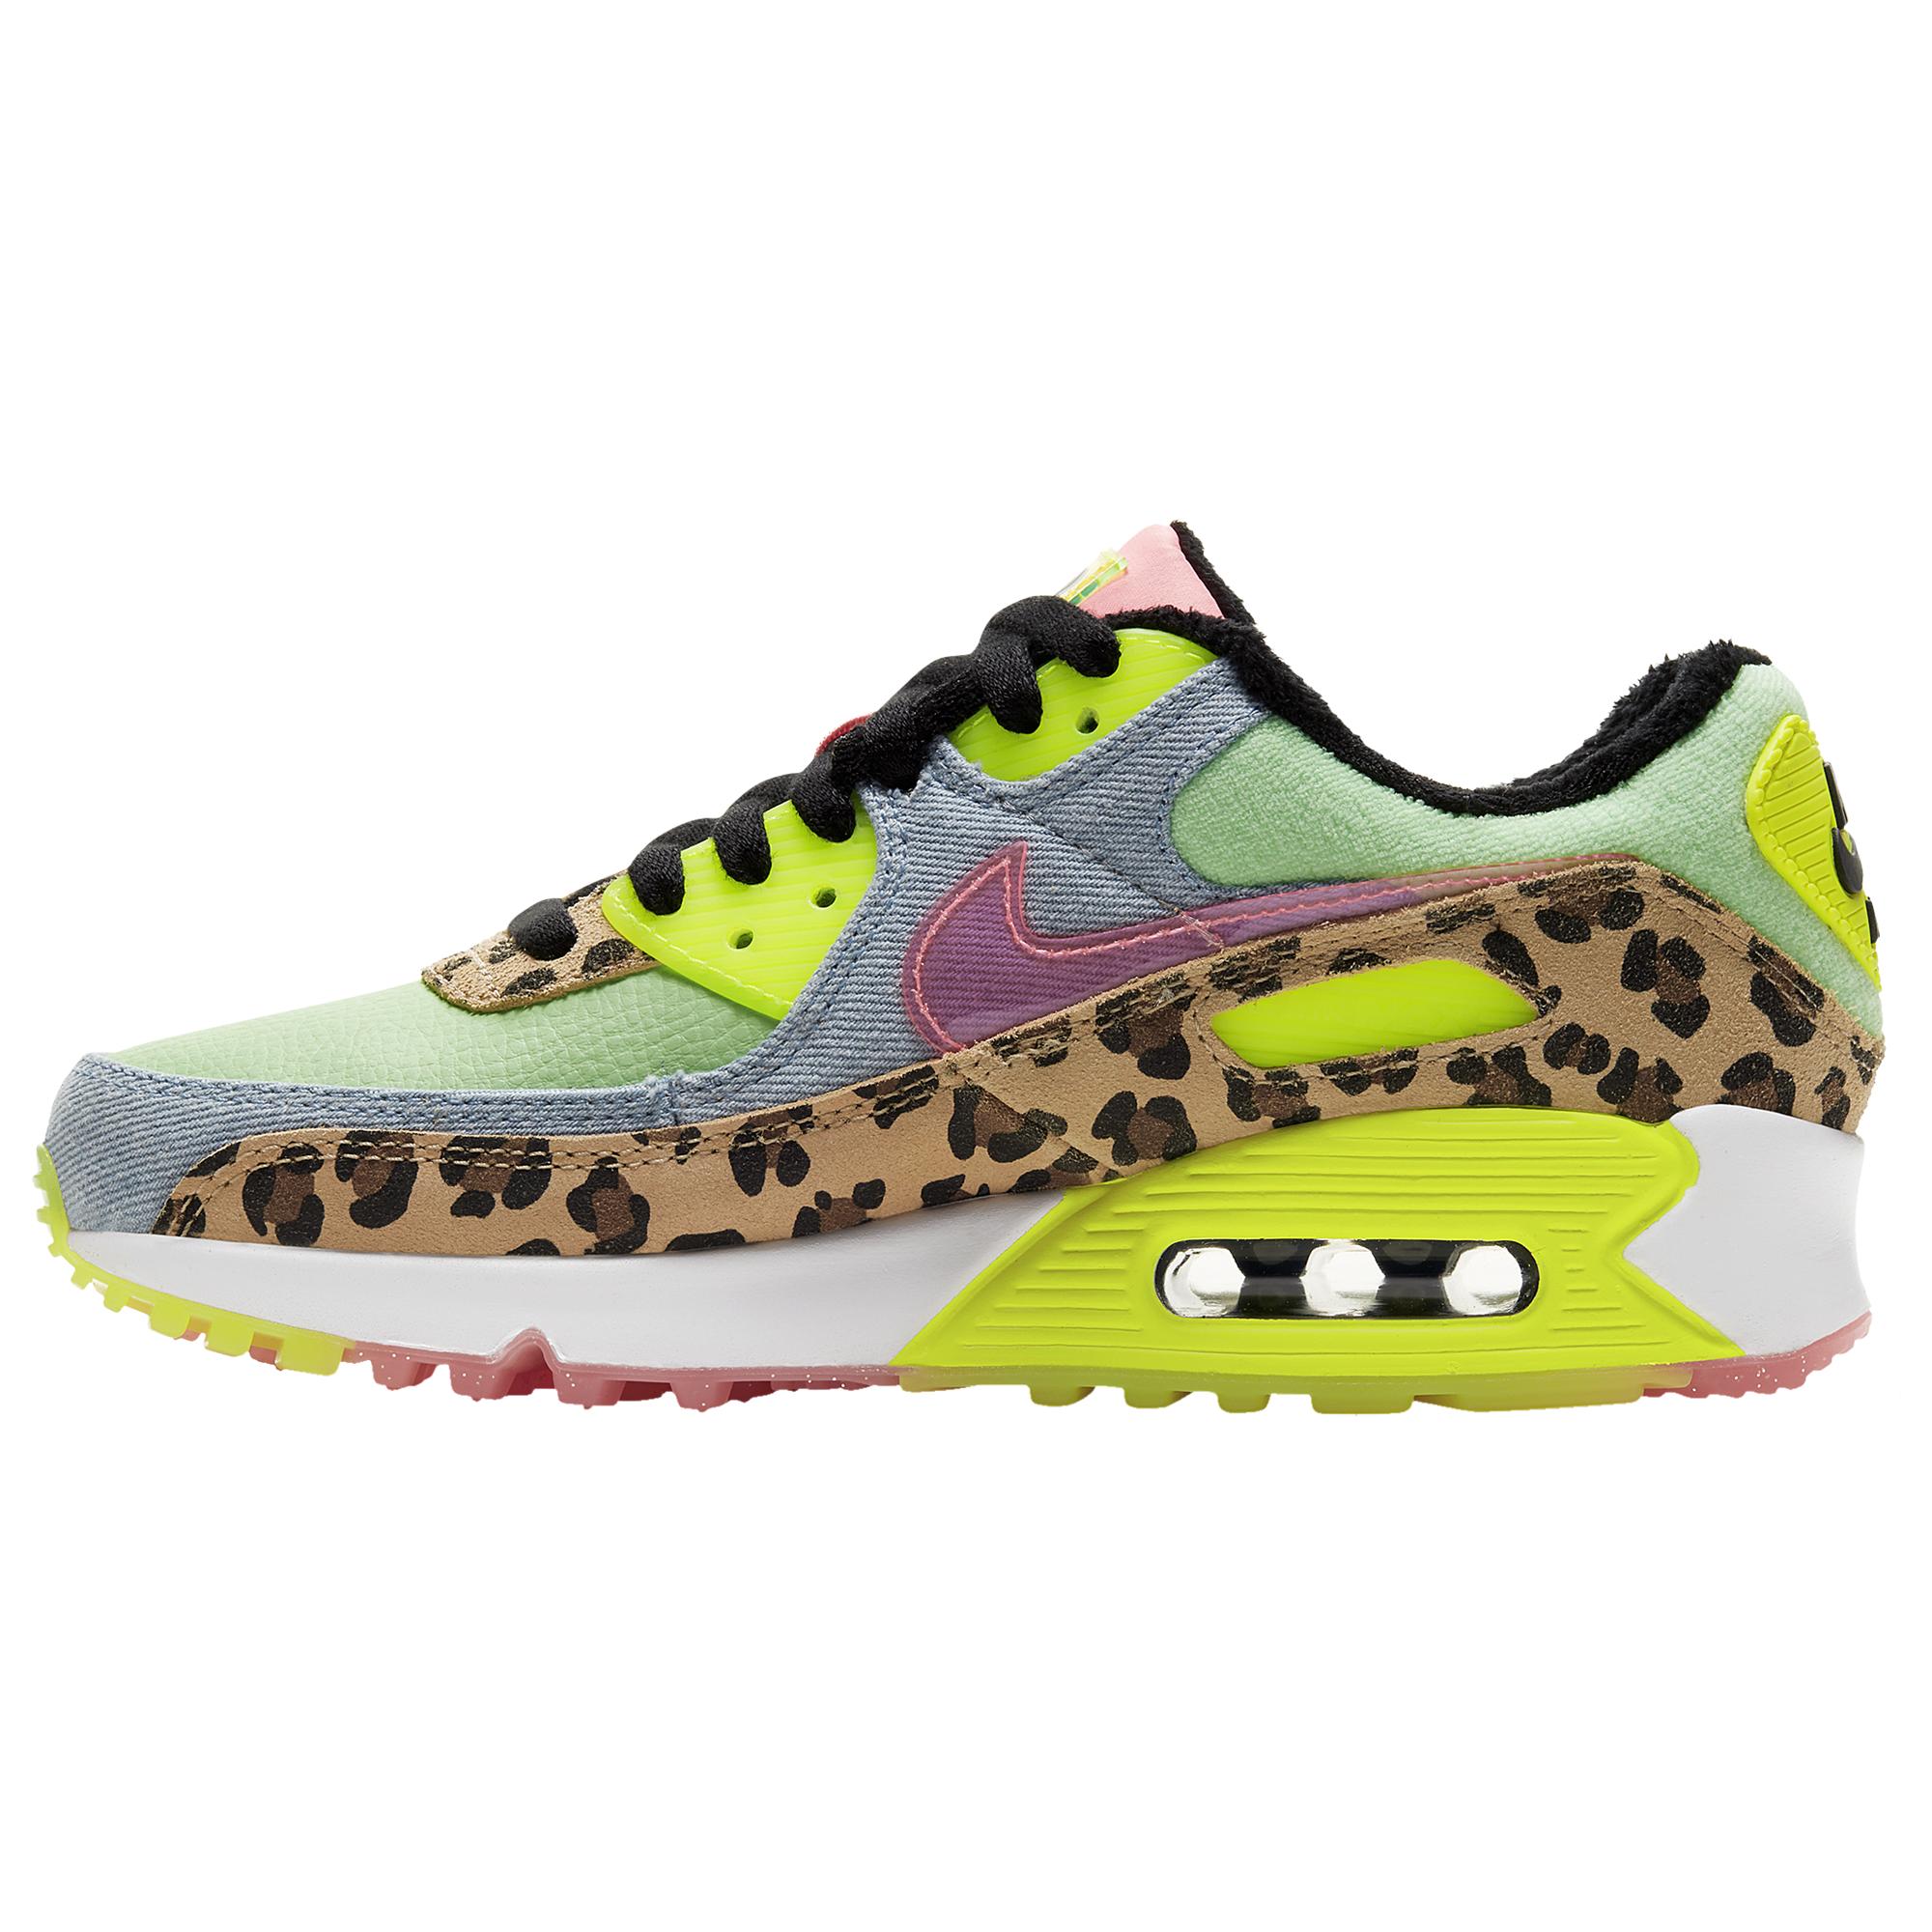 Nike Denim Air Max 90 Lx - Shoes in Green - Save 42% - Lyst